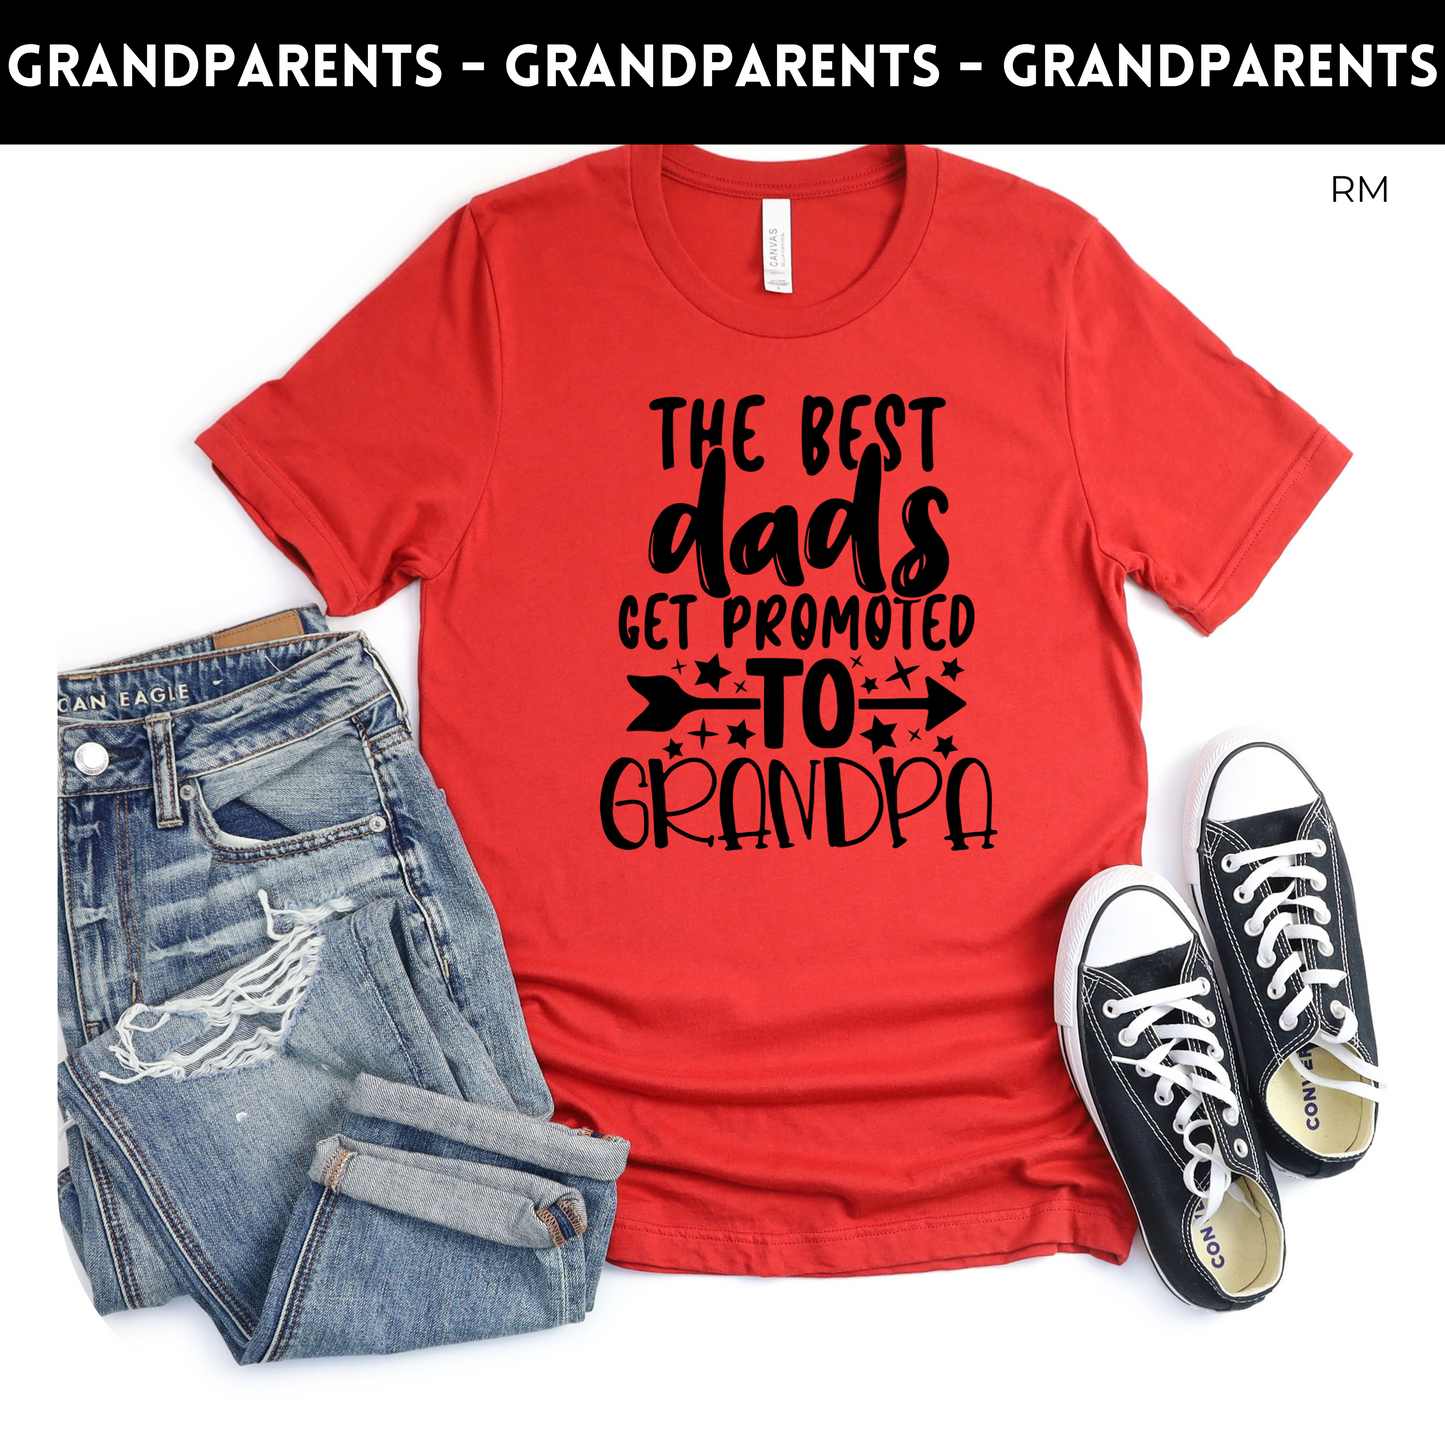 The Best Dads Get Promoted Adult Shirt- Grandparents 110